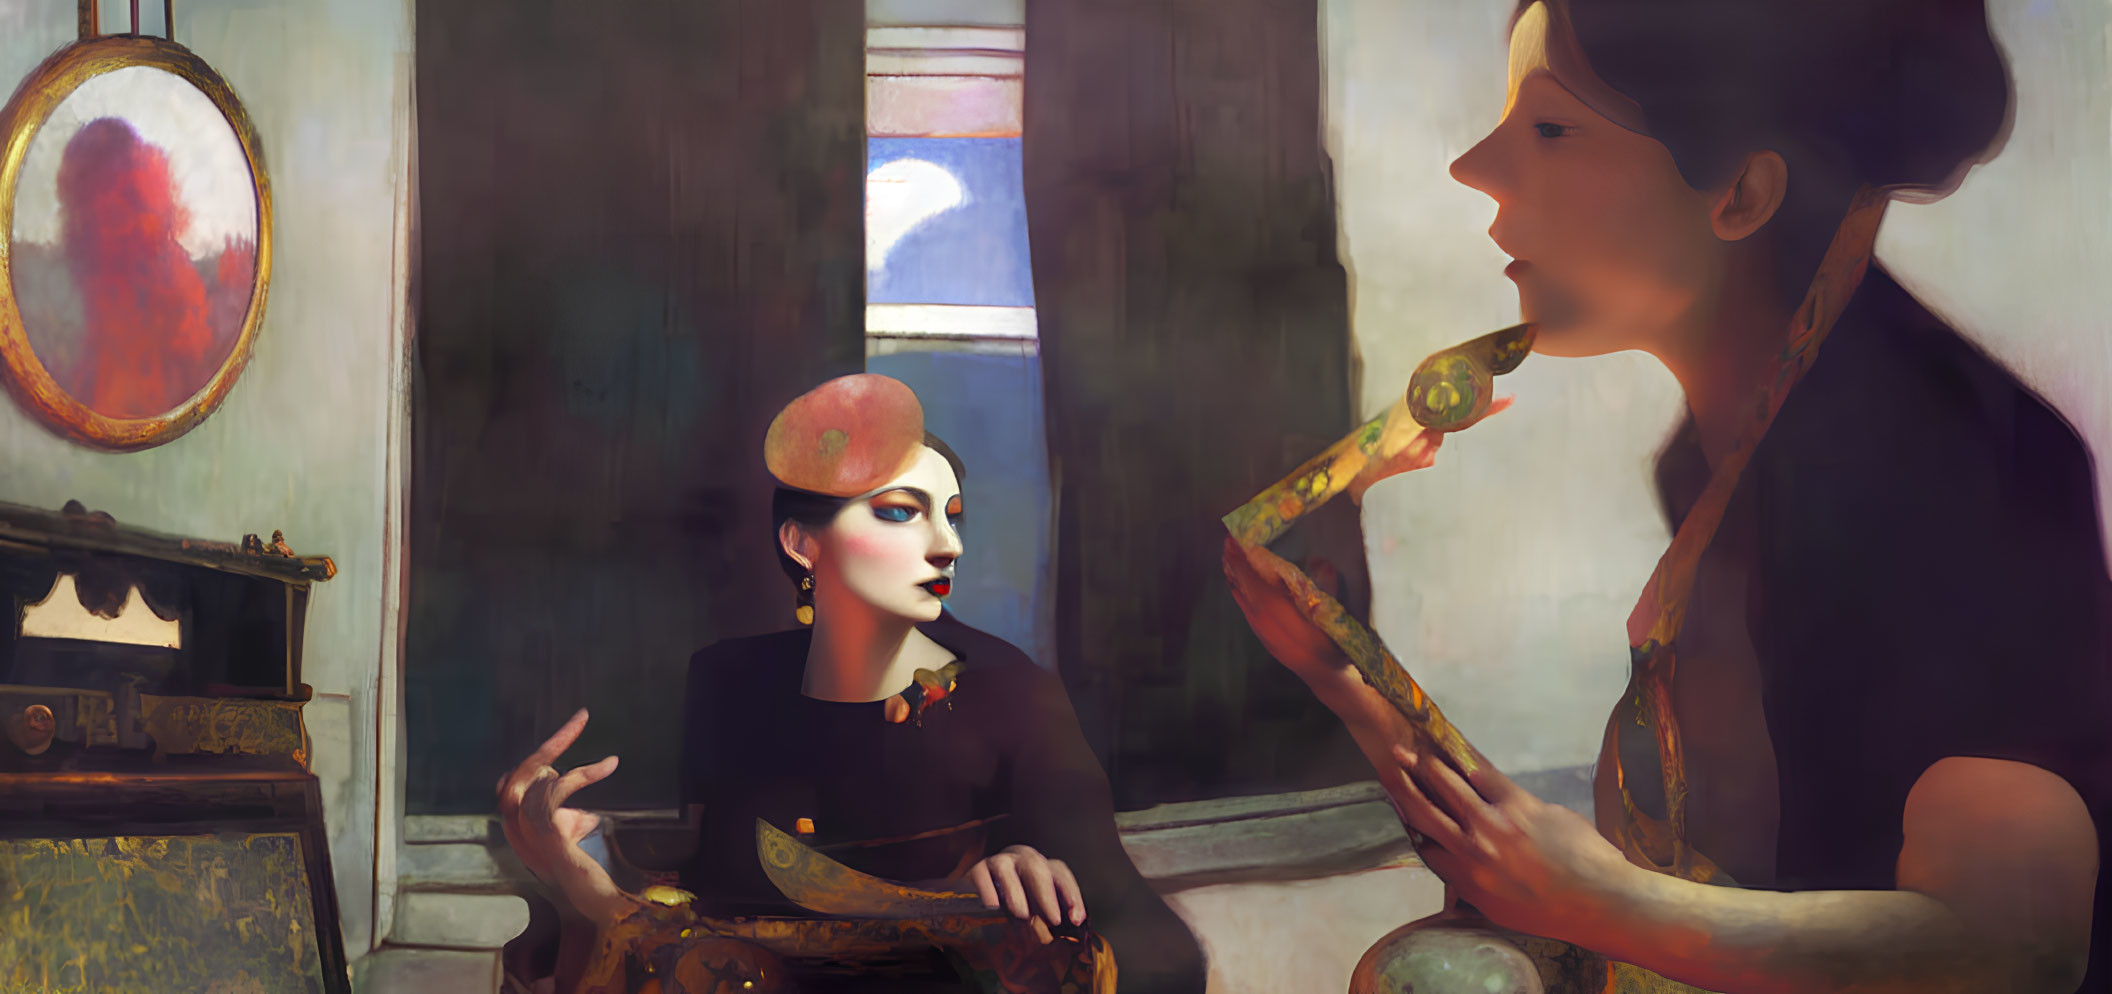 Stylized women conversing in vintage room with fireplace and mirror